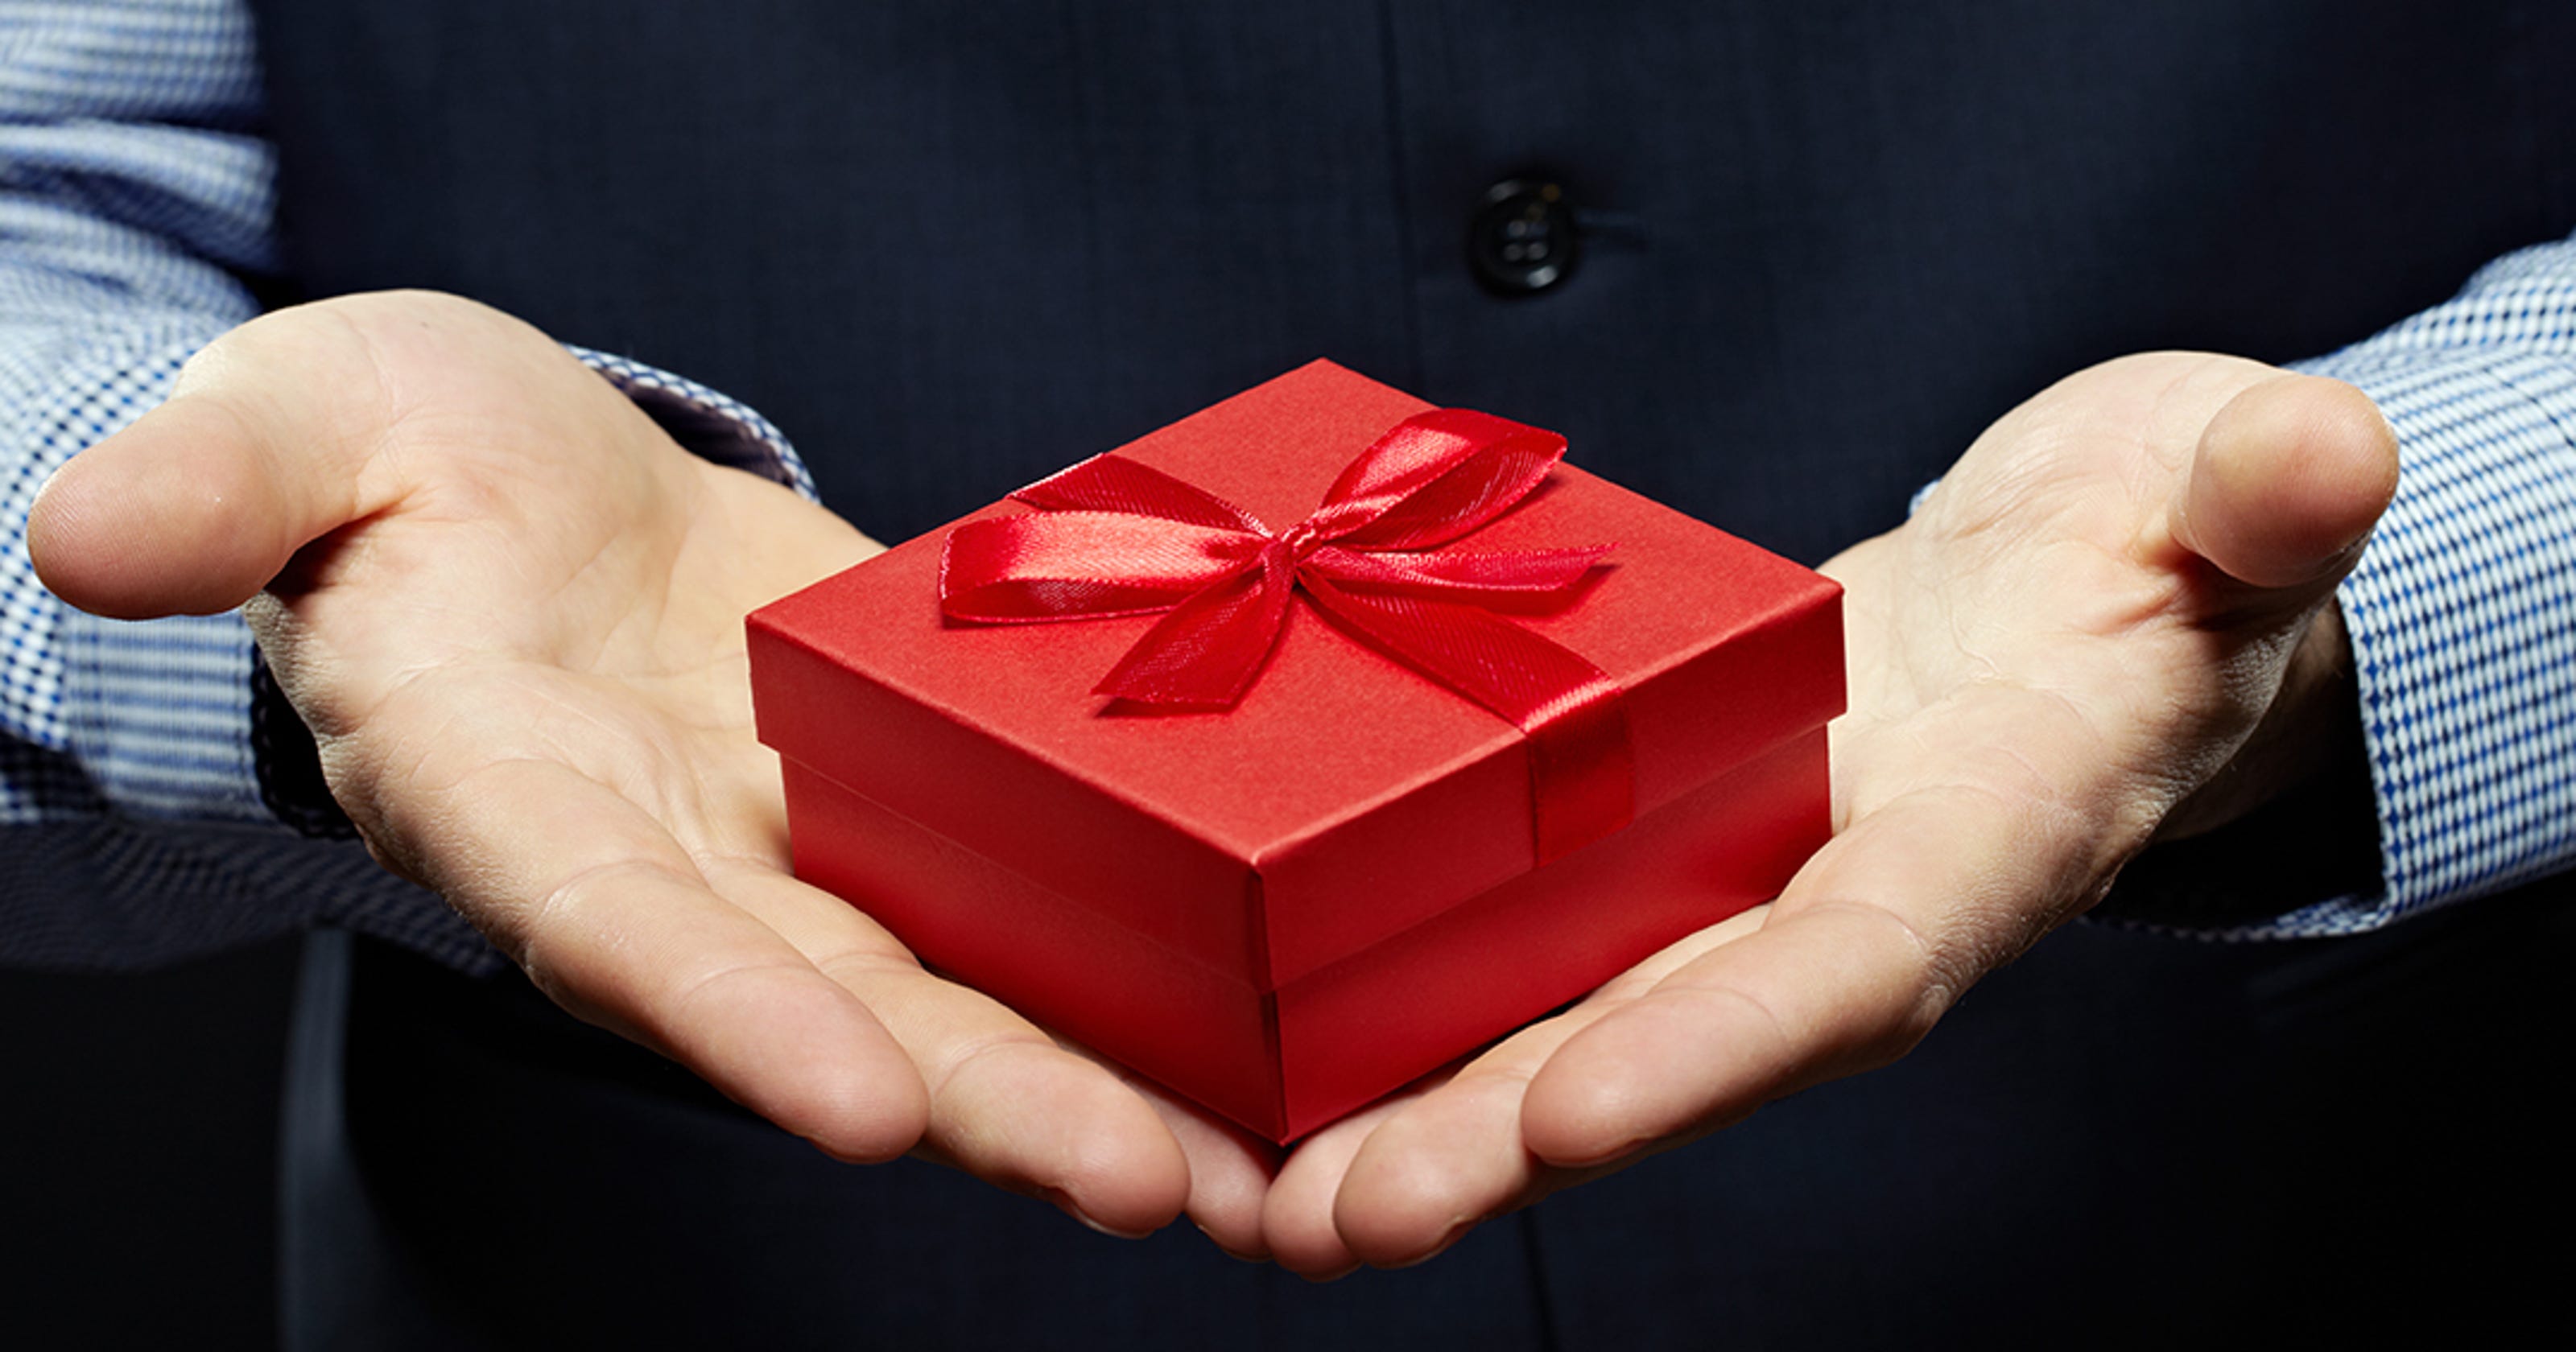 employee-gifts-are-they-taxable-income-tax-deductible-for-the-company